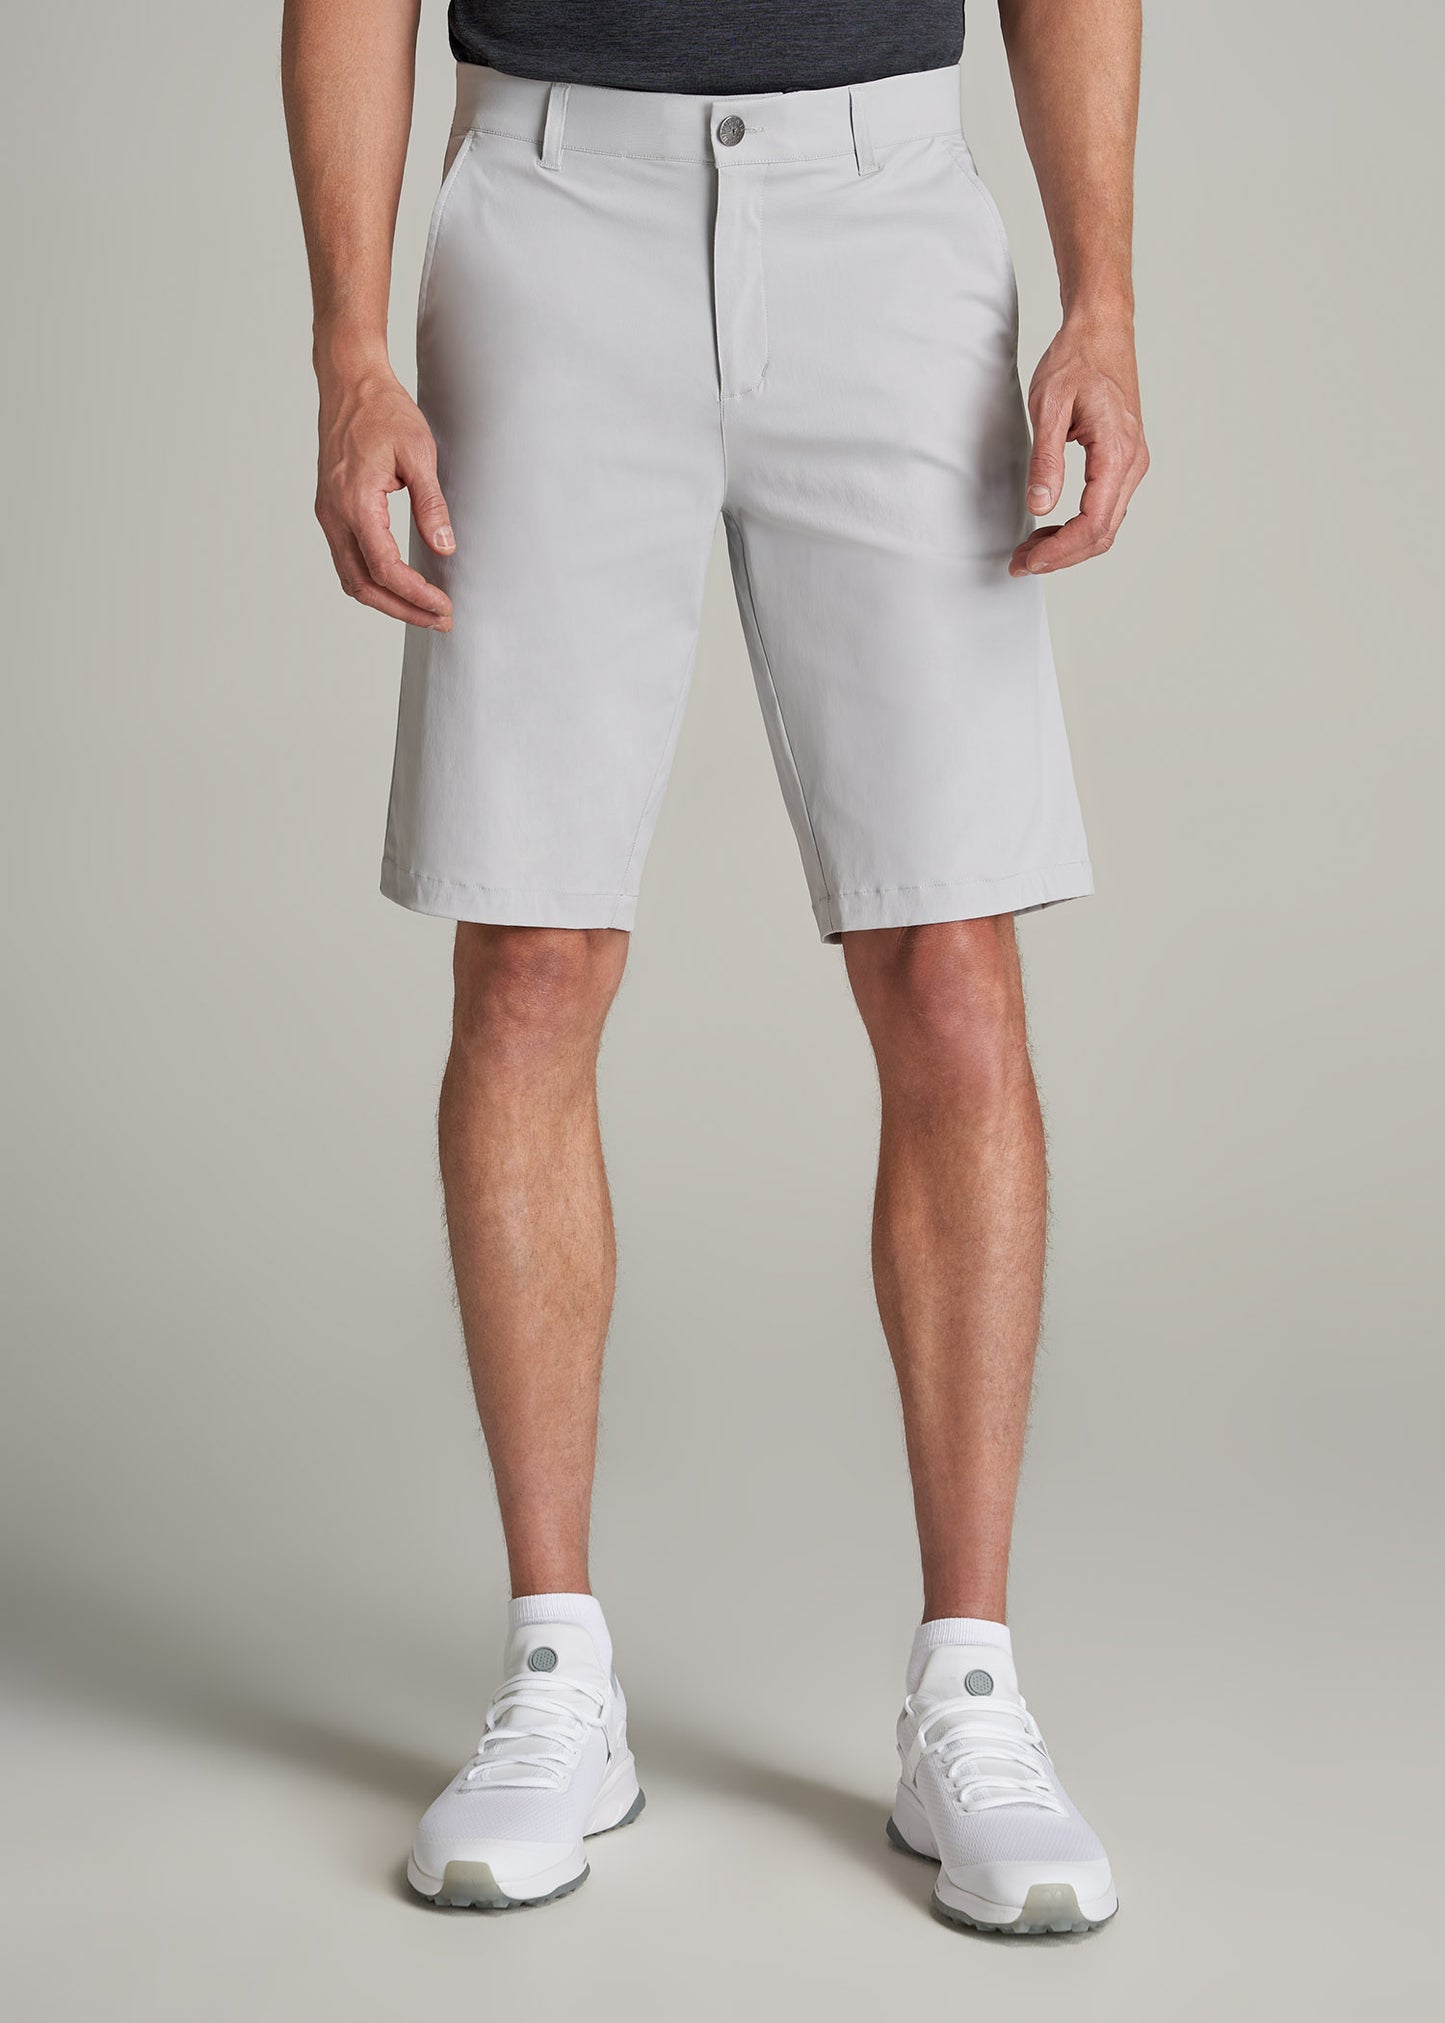 A tall man wearing American Tall's Traveler Chino Shorts in Light Grey.